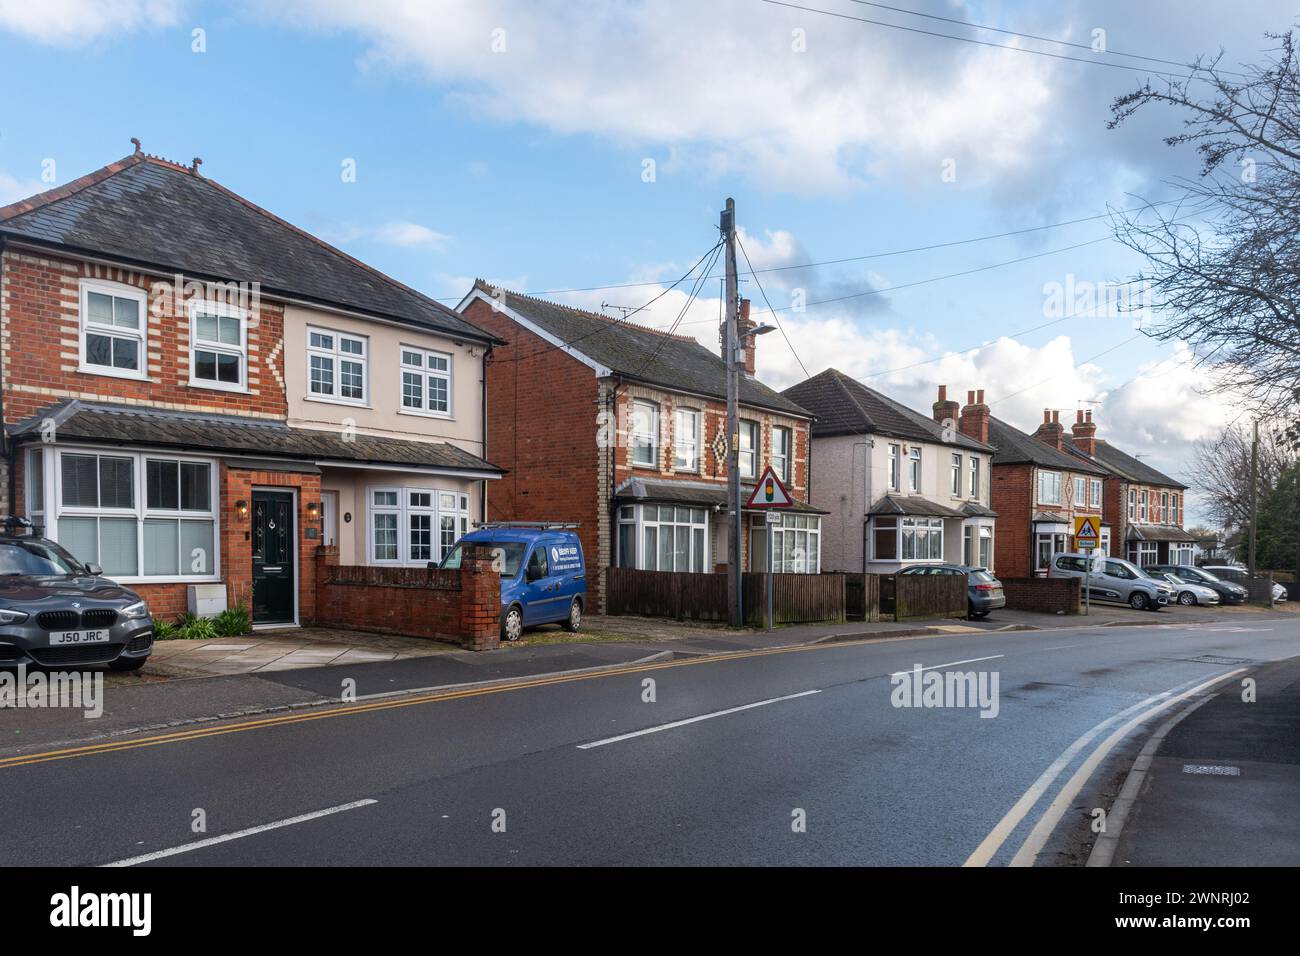 Houses or properties on School Green, a road in Shinfield village centre, Berkshire, England, UK Stock Photo